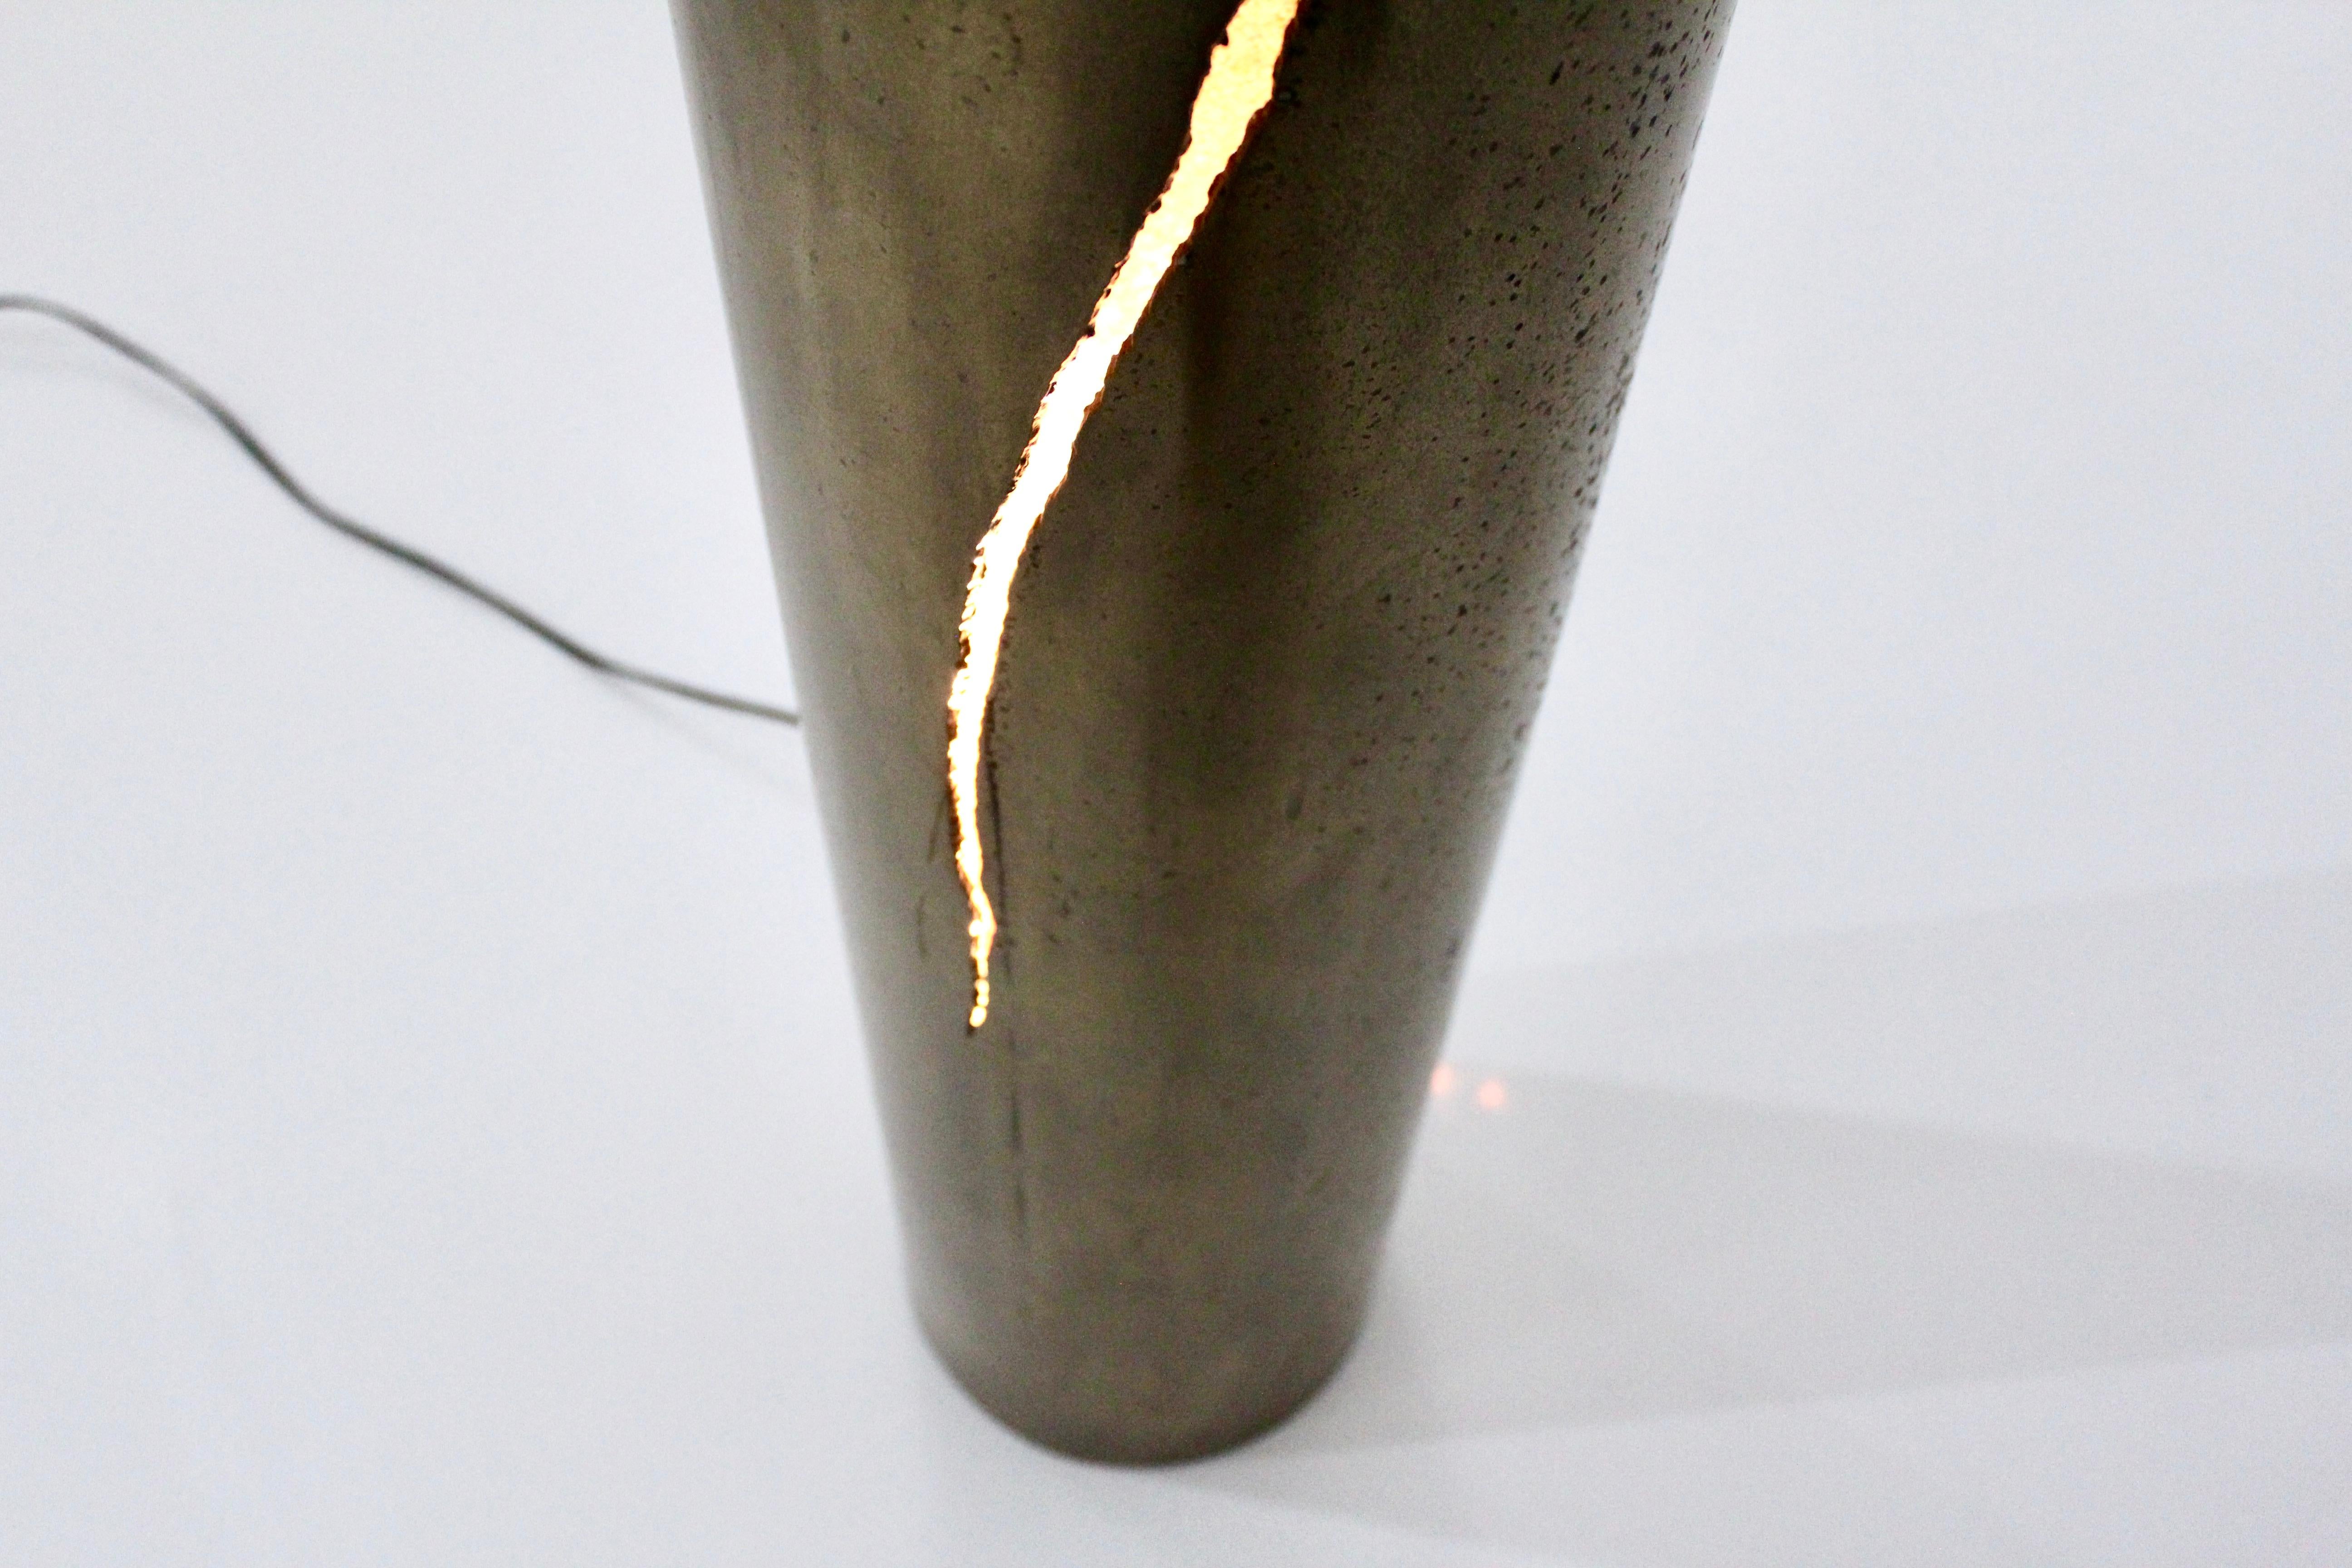 Stunning Sculptural Lighting Floor Lamp by Gianluca Pacchioni, Italian Design  For Sale 2